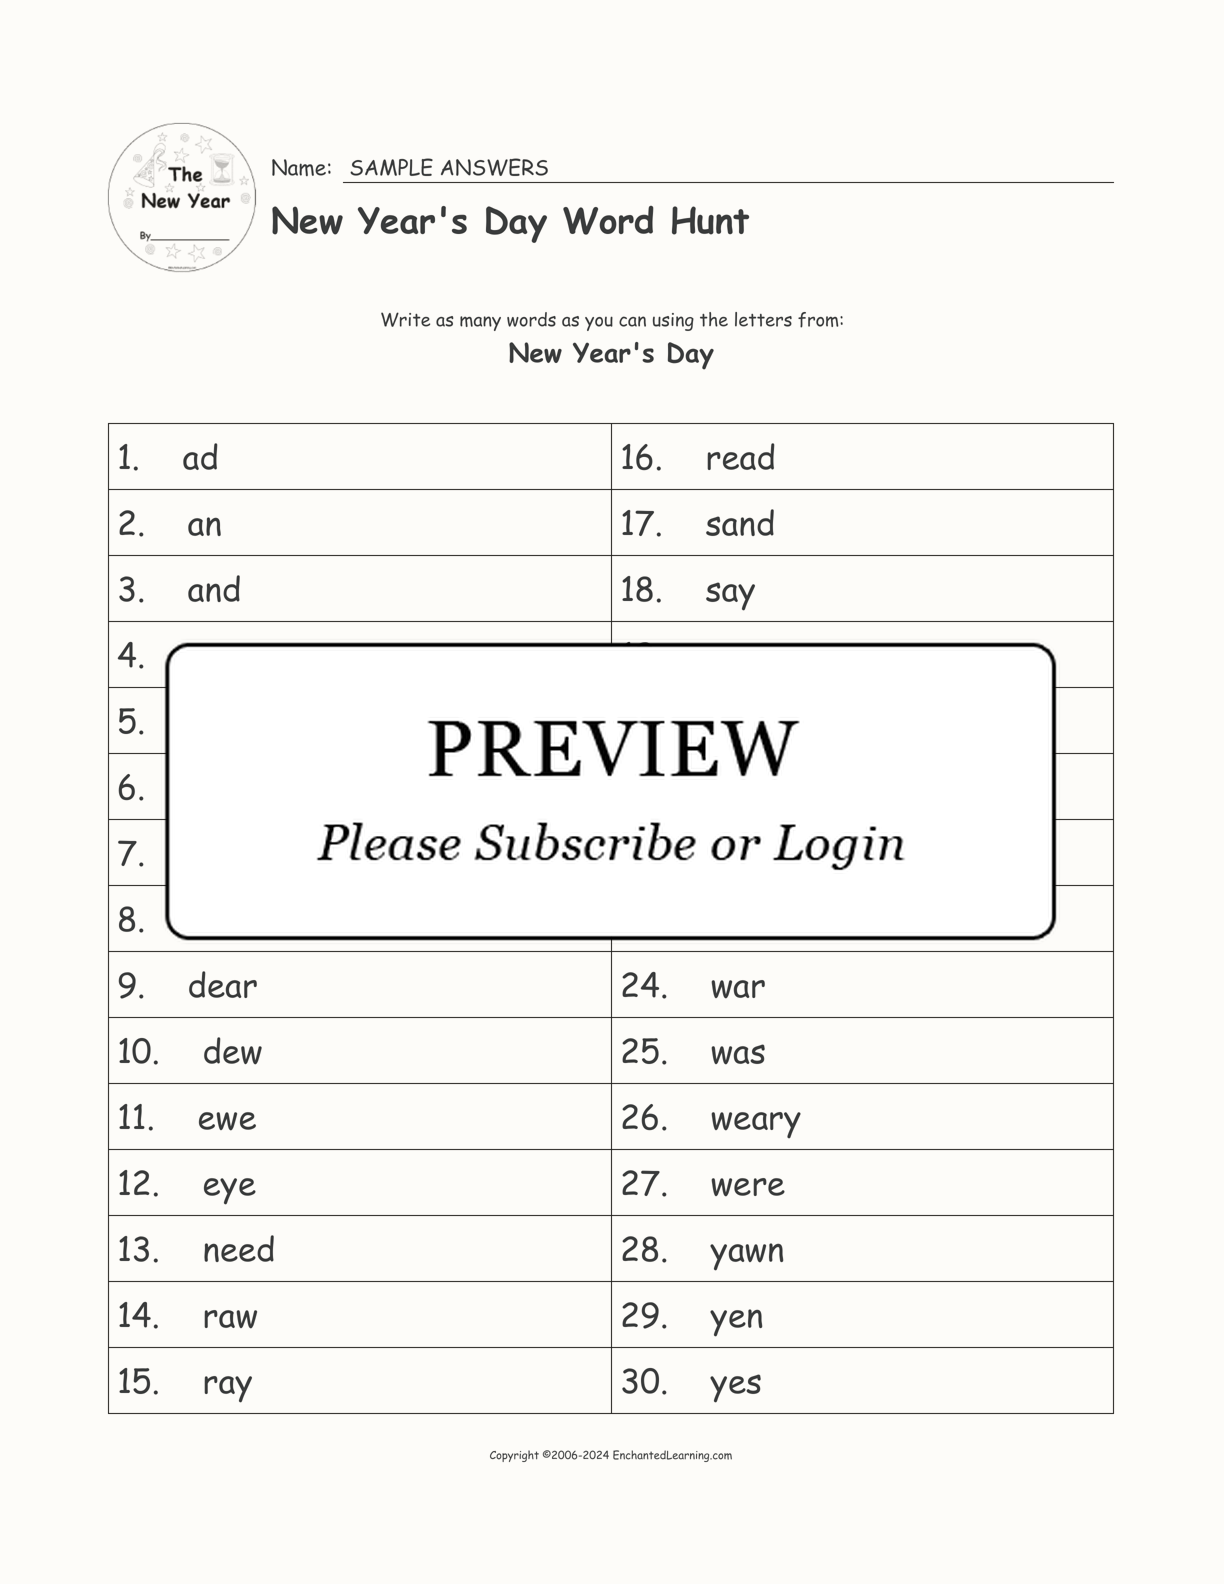 New Year's Day Word Hunt interactive worksheet page 2